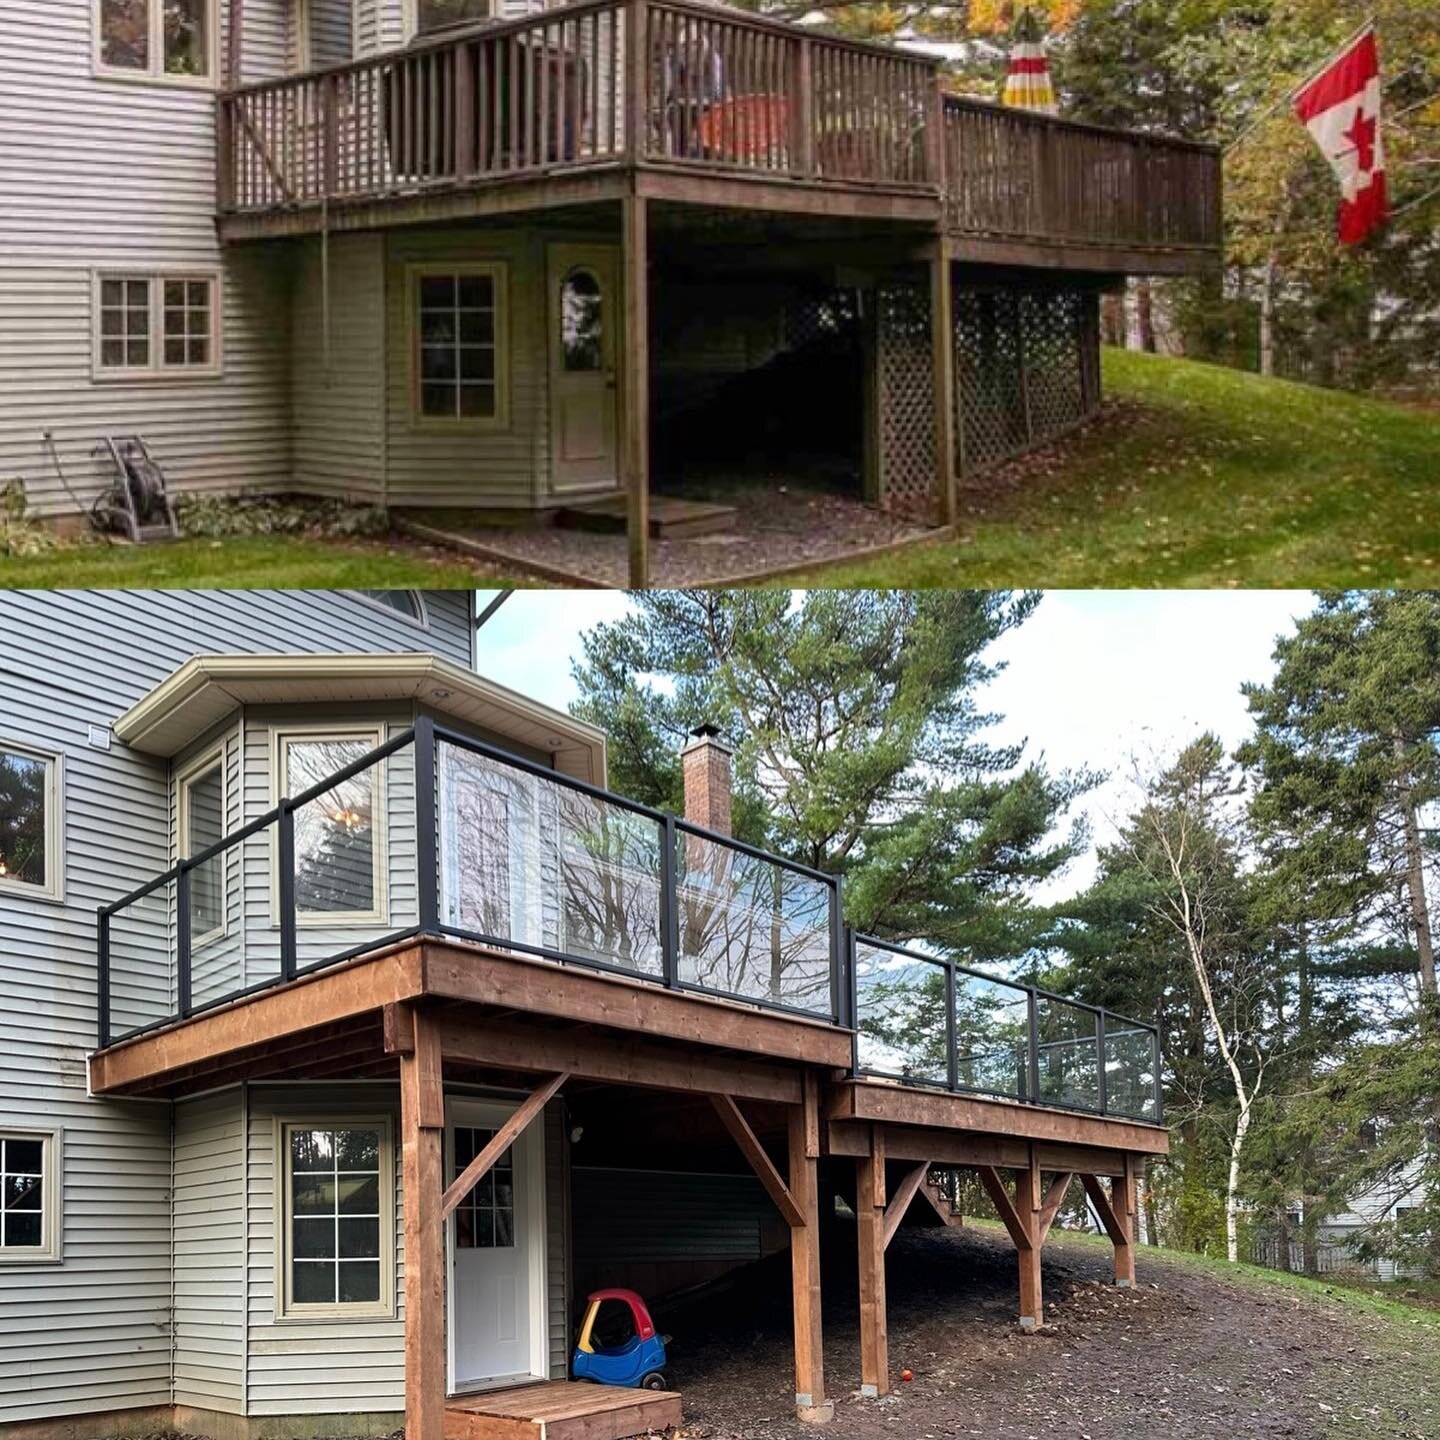 Before and after of this wonderful split level deck we just completed for our awesome customers in Bedford. Aluminum railings with glass from @centuryrailings and pressure treated terra brown lumber from @goodfellowinc 
#blueridgebuilders #halifaxcon